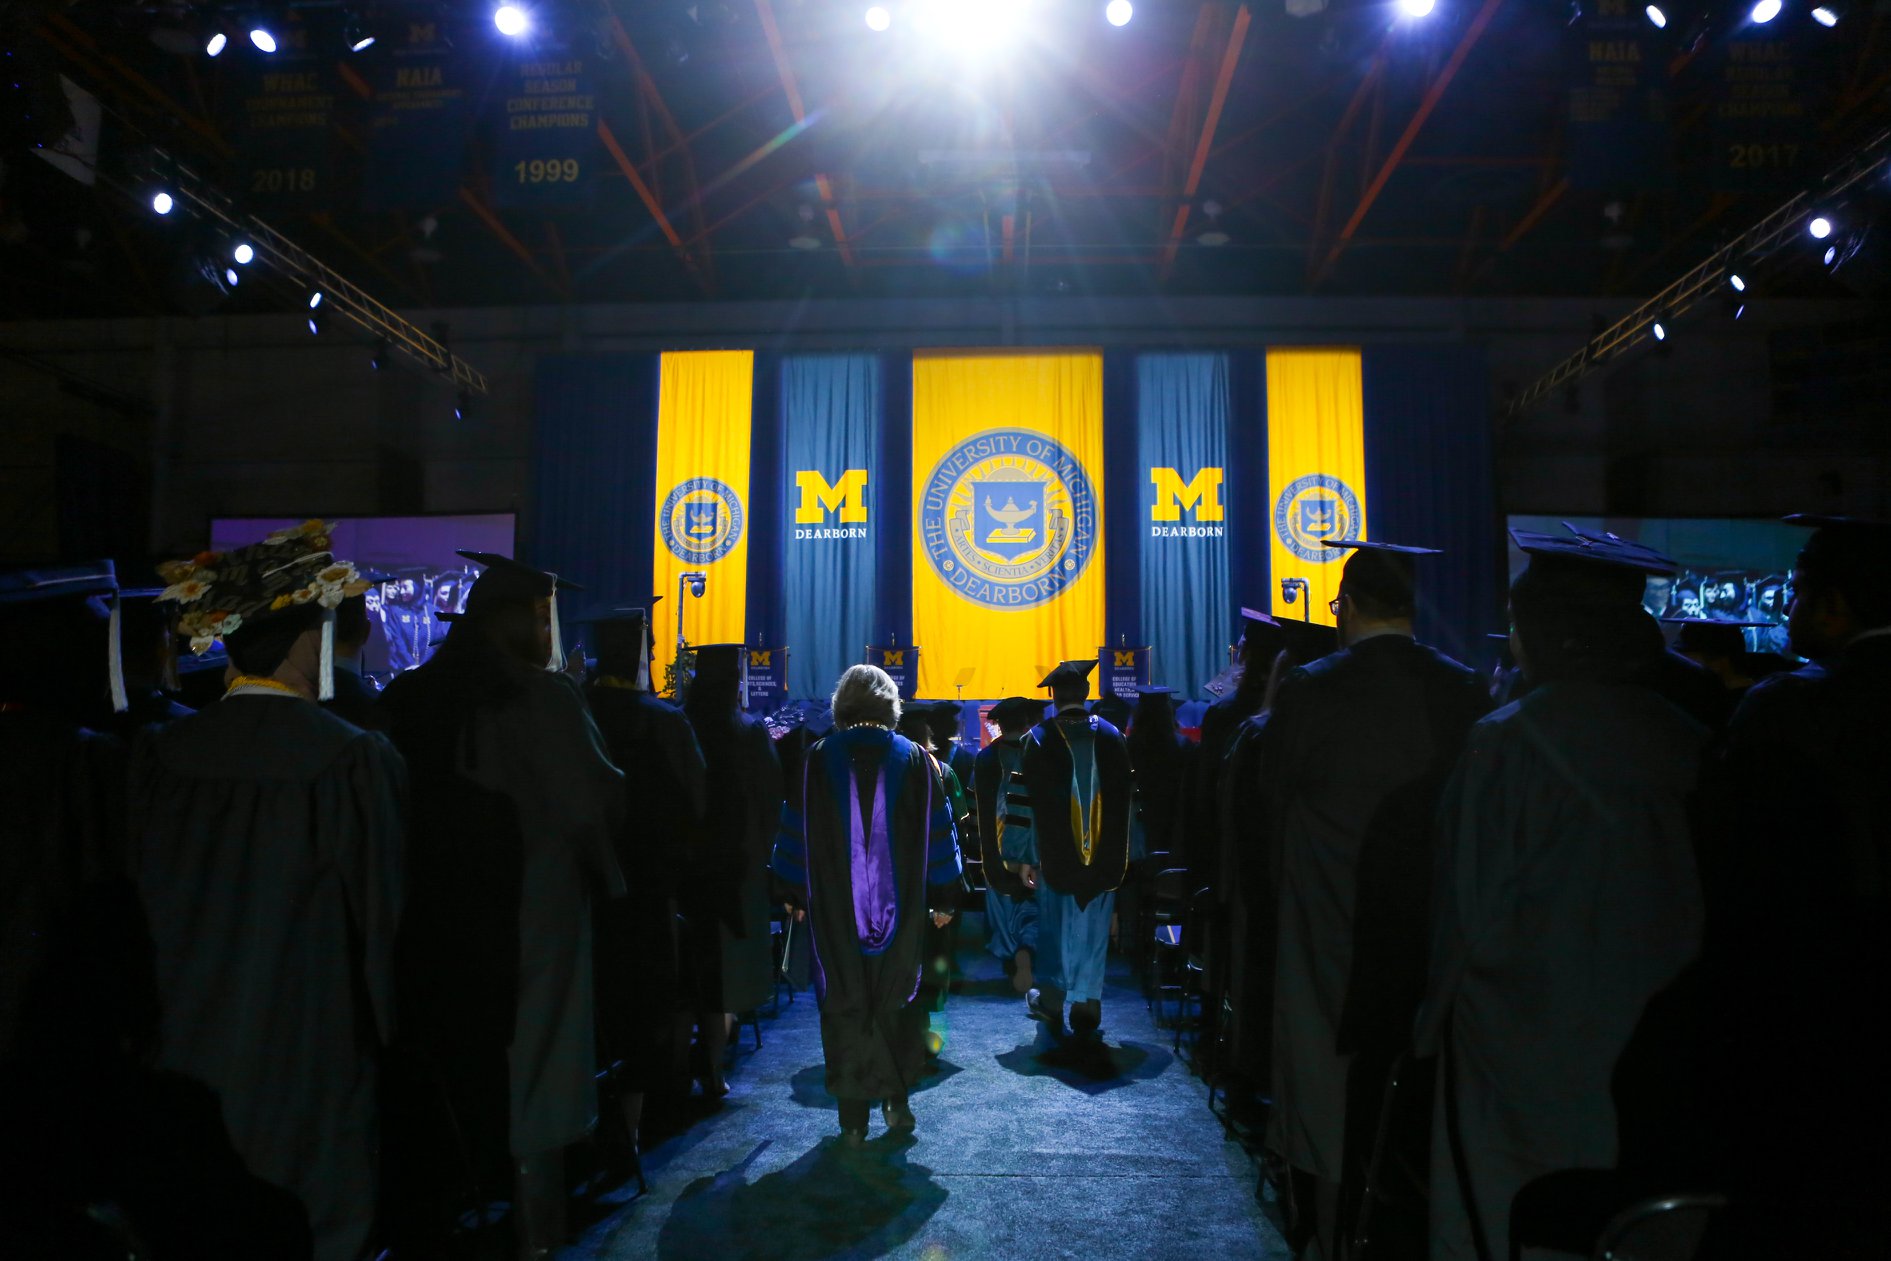 Wearing regalia, distinguished guests file down the main aisle of a commencement ceremony in 2019.